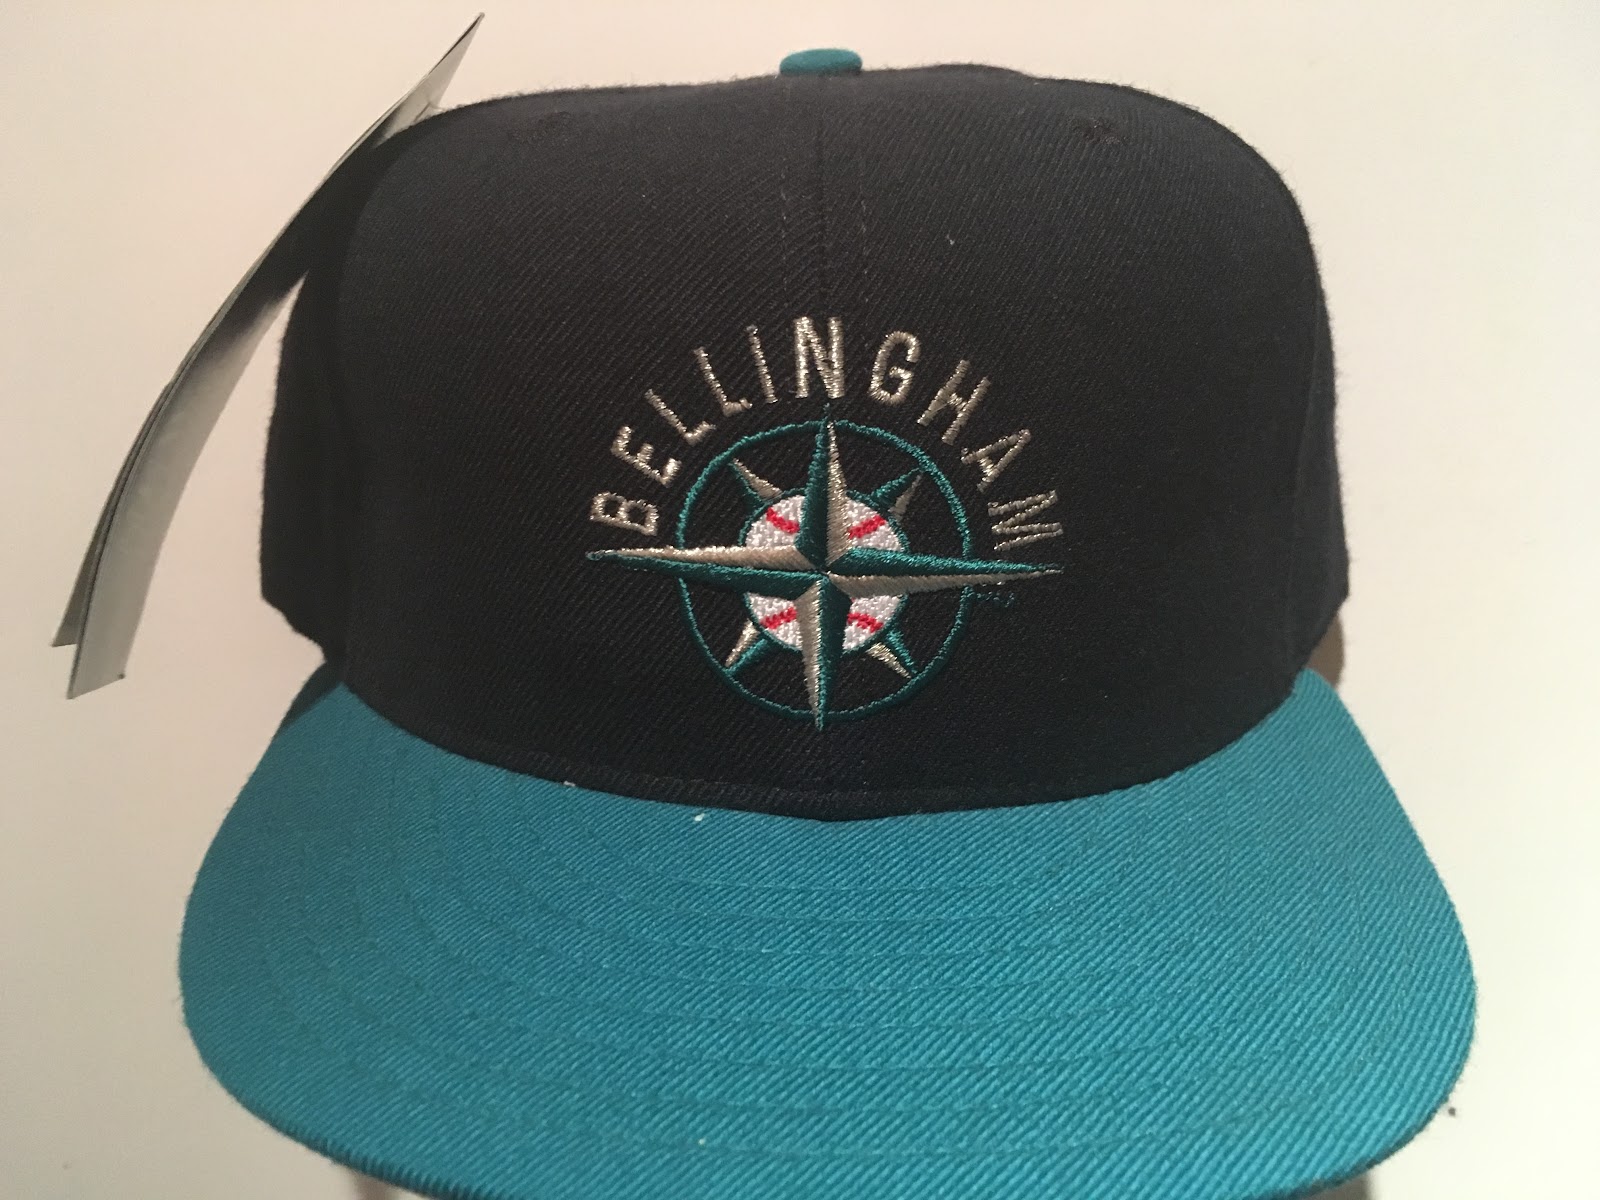 1994 Bellingham Mariners - Fresh Fitted Friday